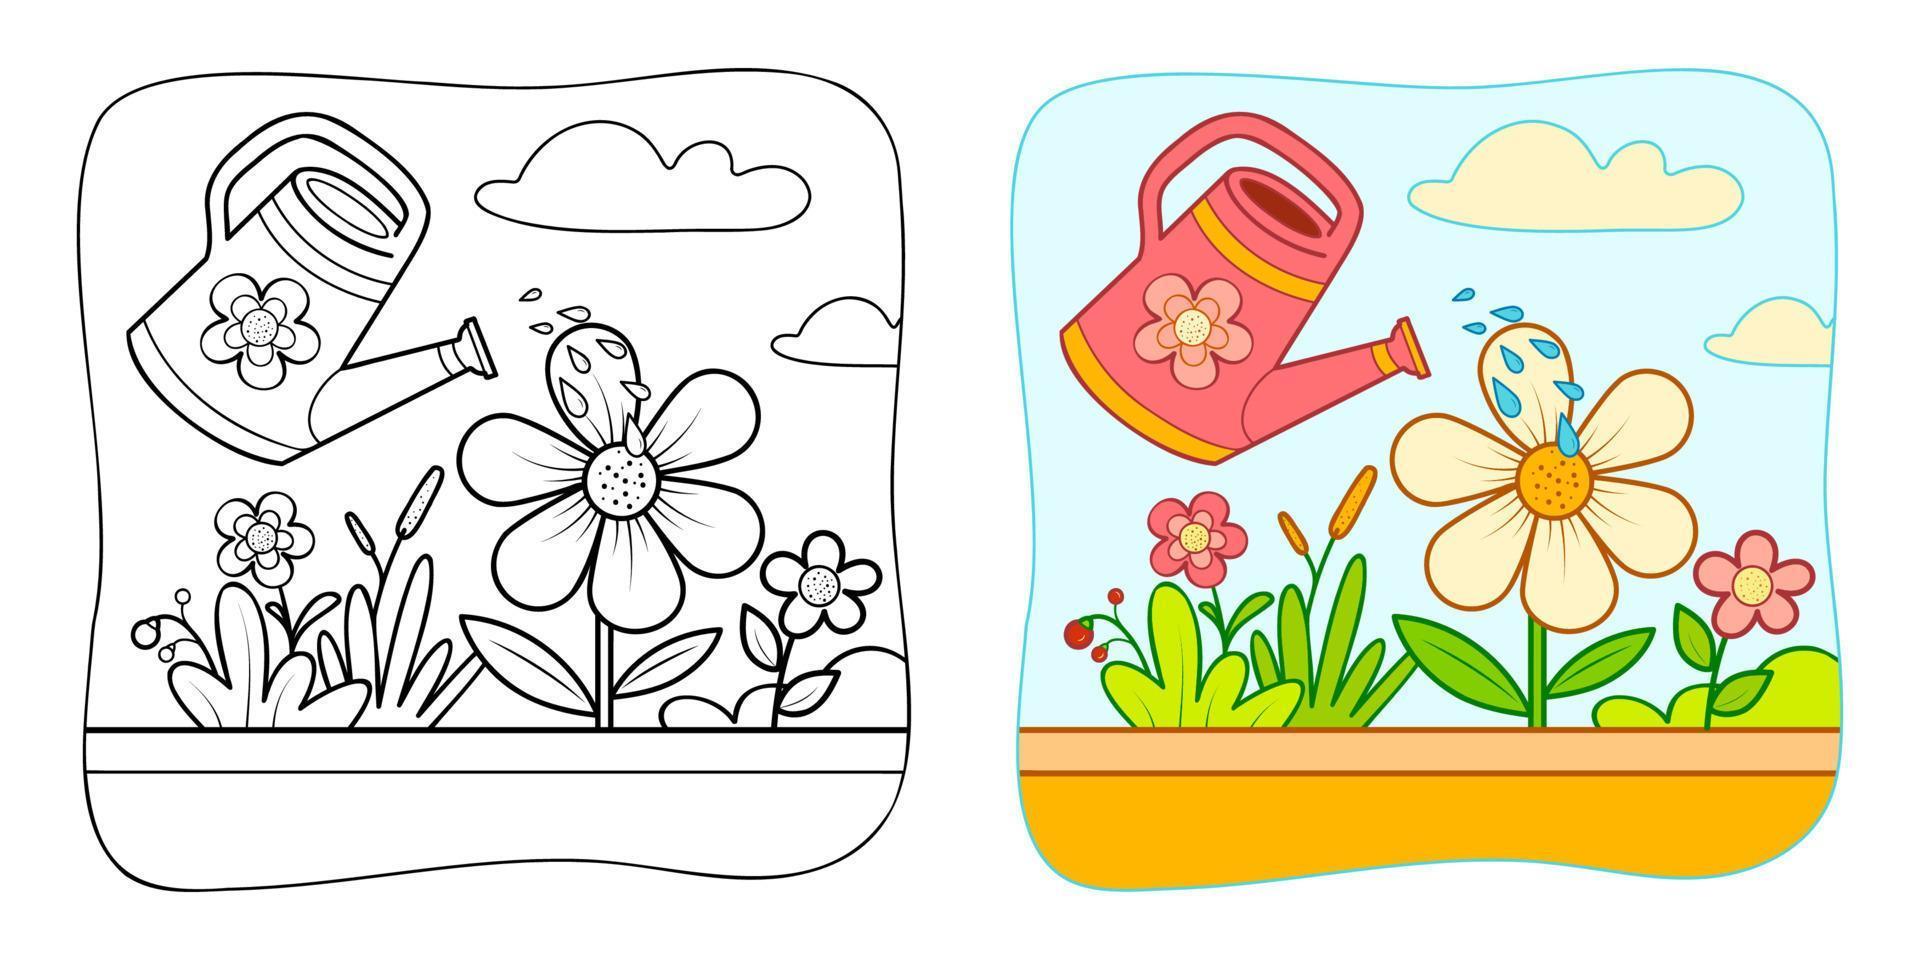 Coloring book or Coloring page for kids. Flowers and watering can vector clipart. Nature background.